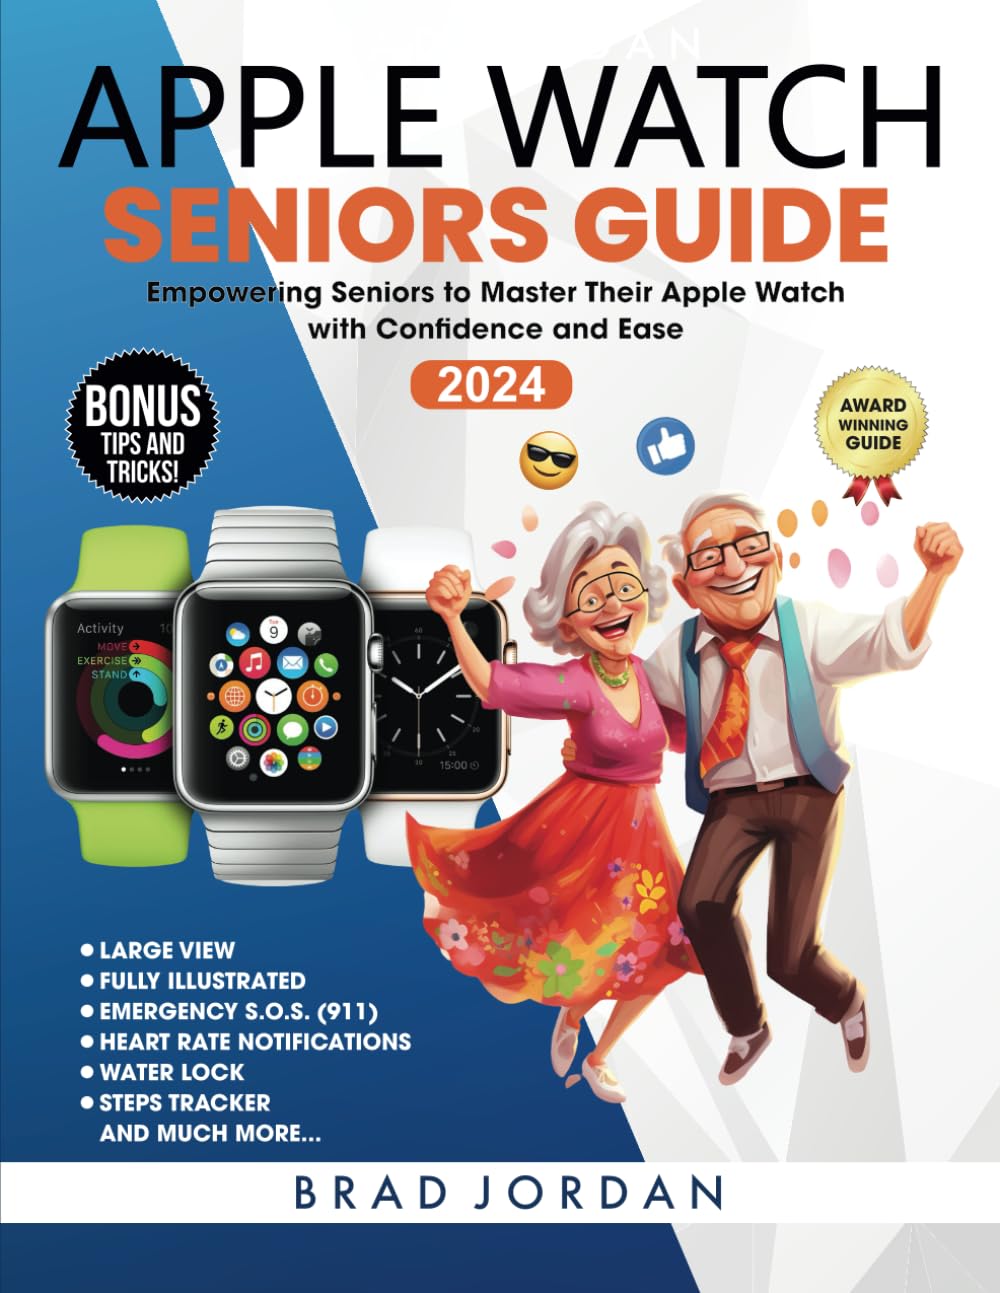 APPLE WATCH SENIORS GUIDE: Empowering Seniors to Master Their Apple Watch with Ease and Confidence